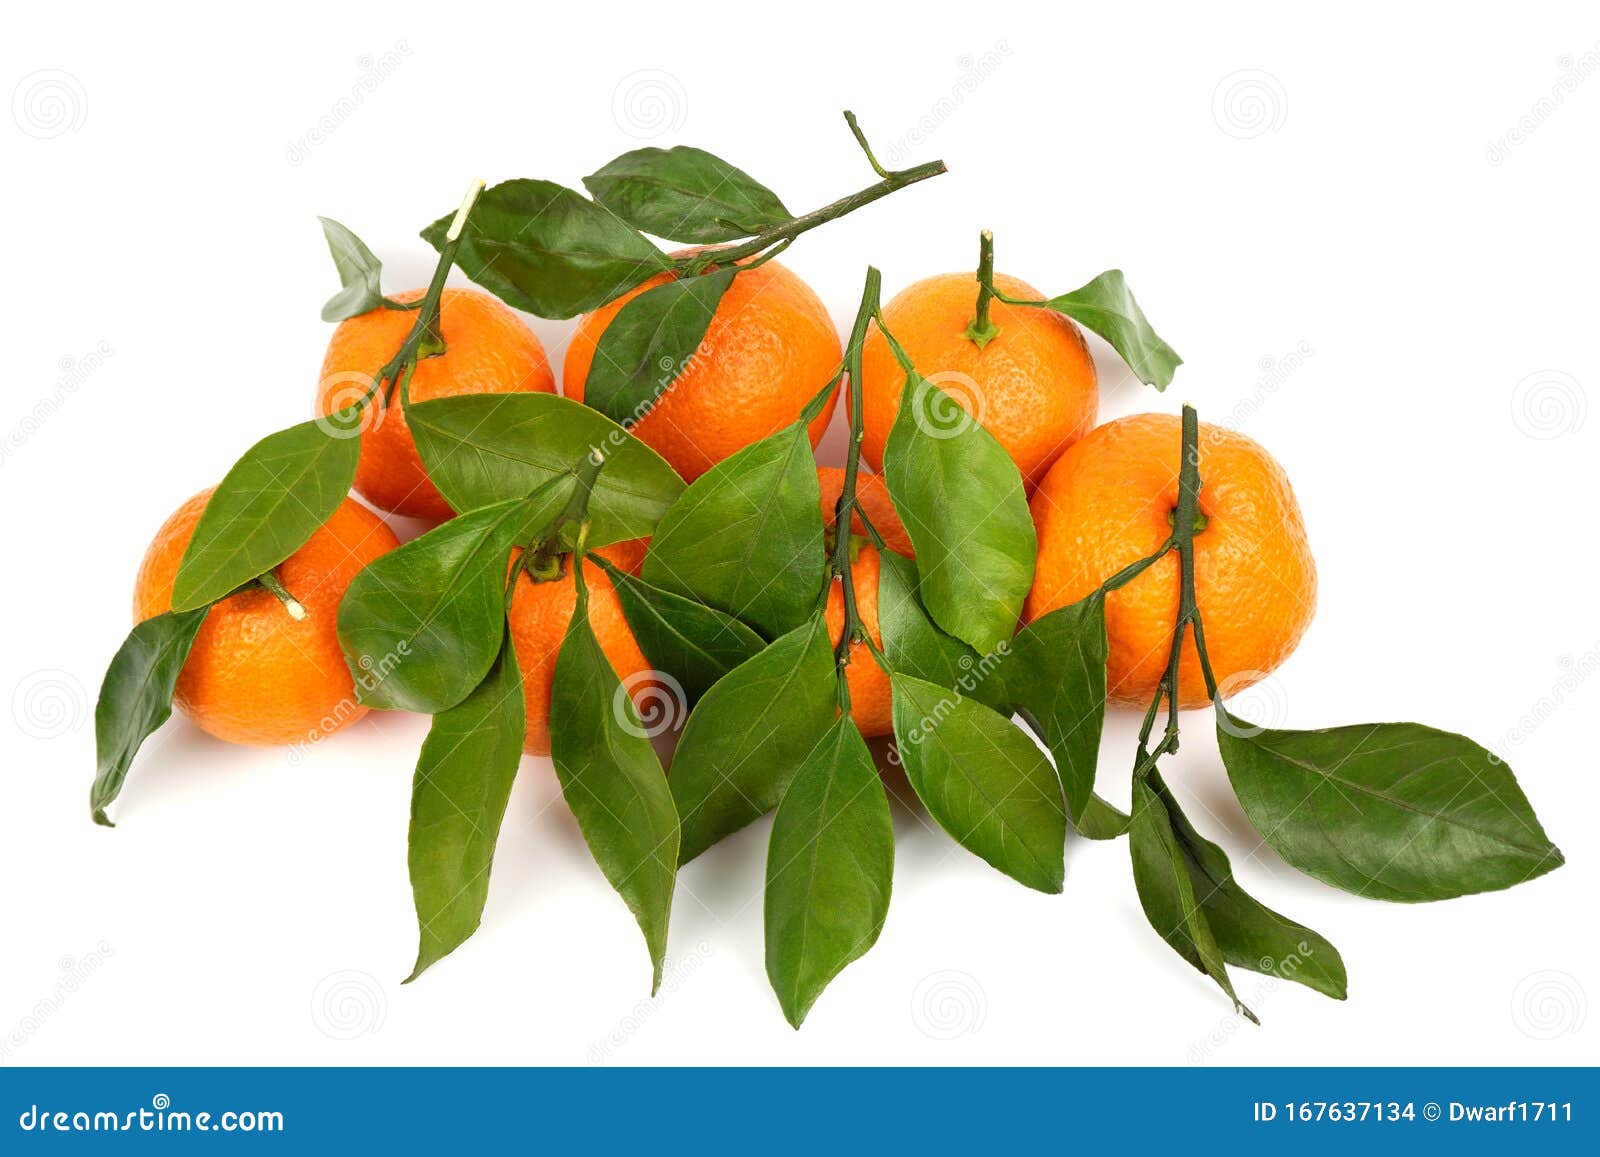 Bunch of ripe juicy orange tangerines with leaves isolated on white background.